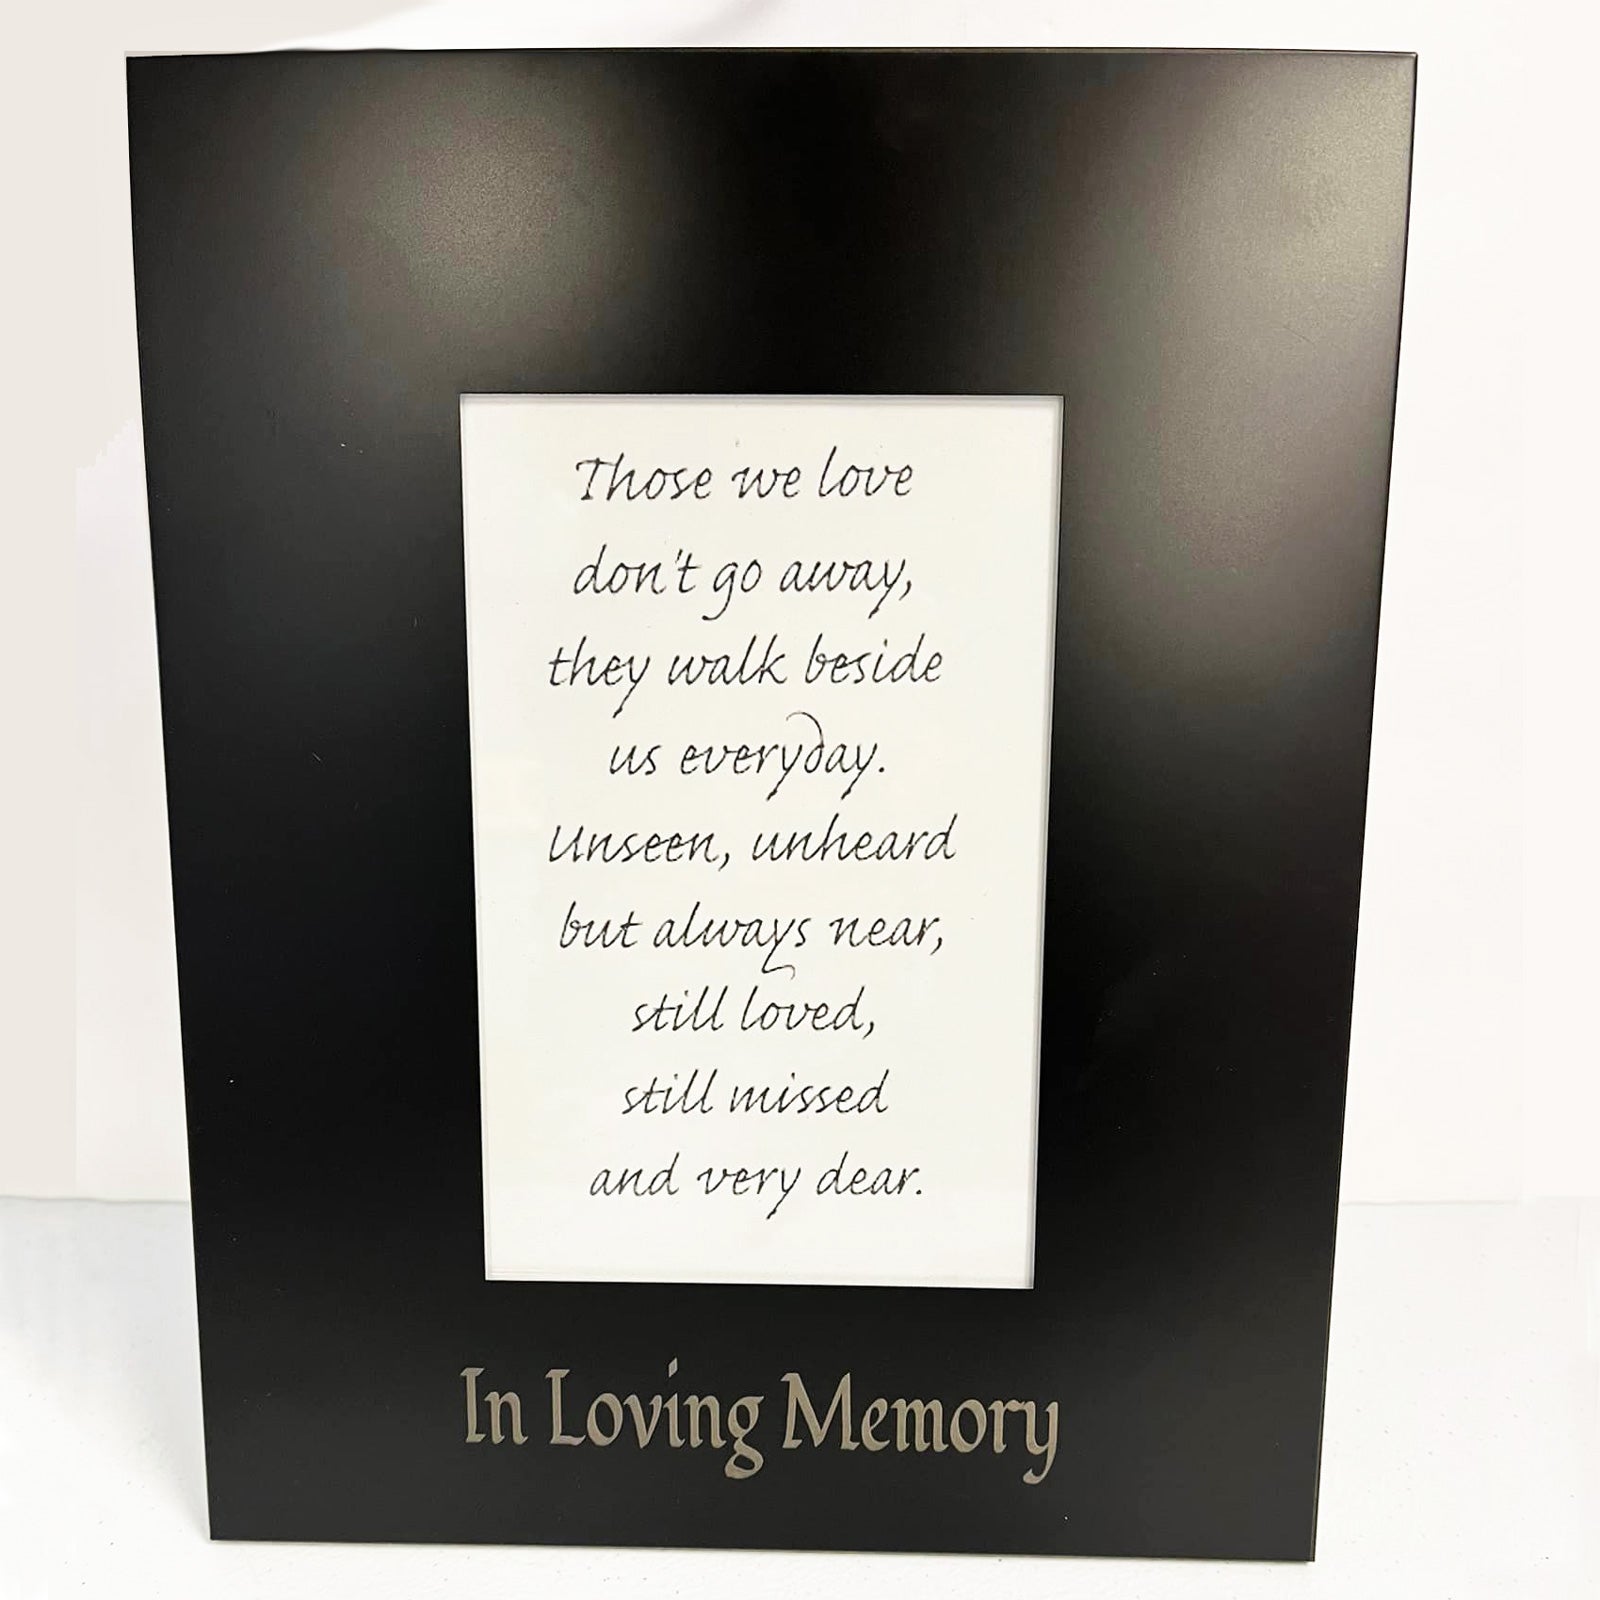 Remembering with Love Sympathy Gift with Frame and Gourmet Food for Sending Condolences for the Loss of a Loved One